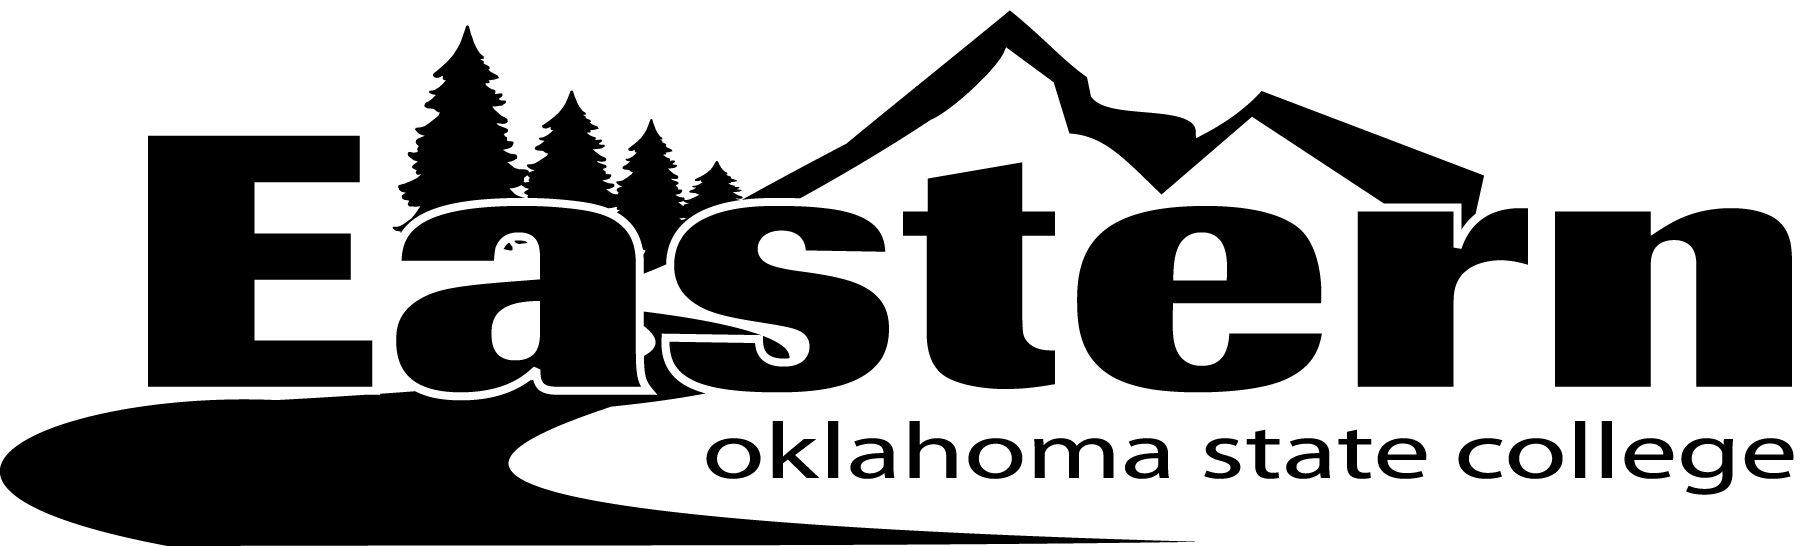 Eastern Logo - Eastern Oklahoma State College | Official College Logos & Color ...